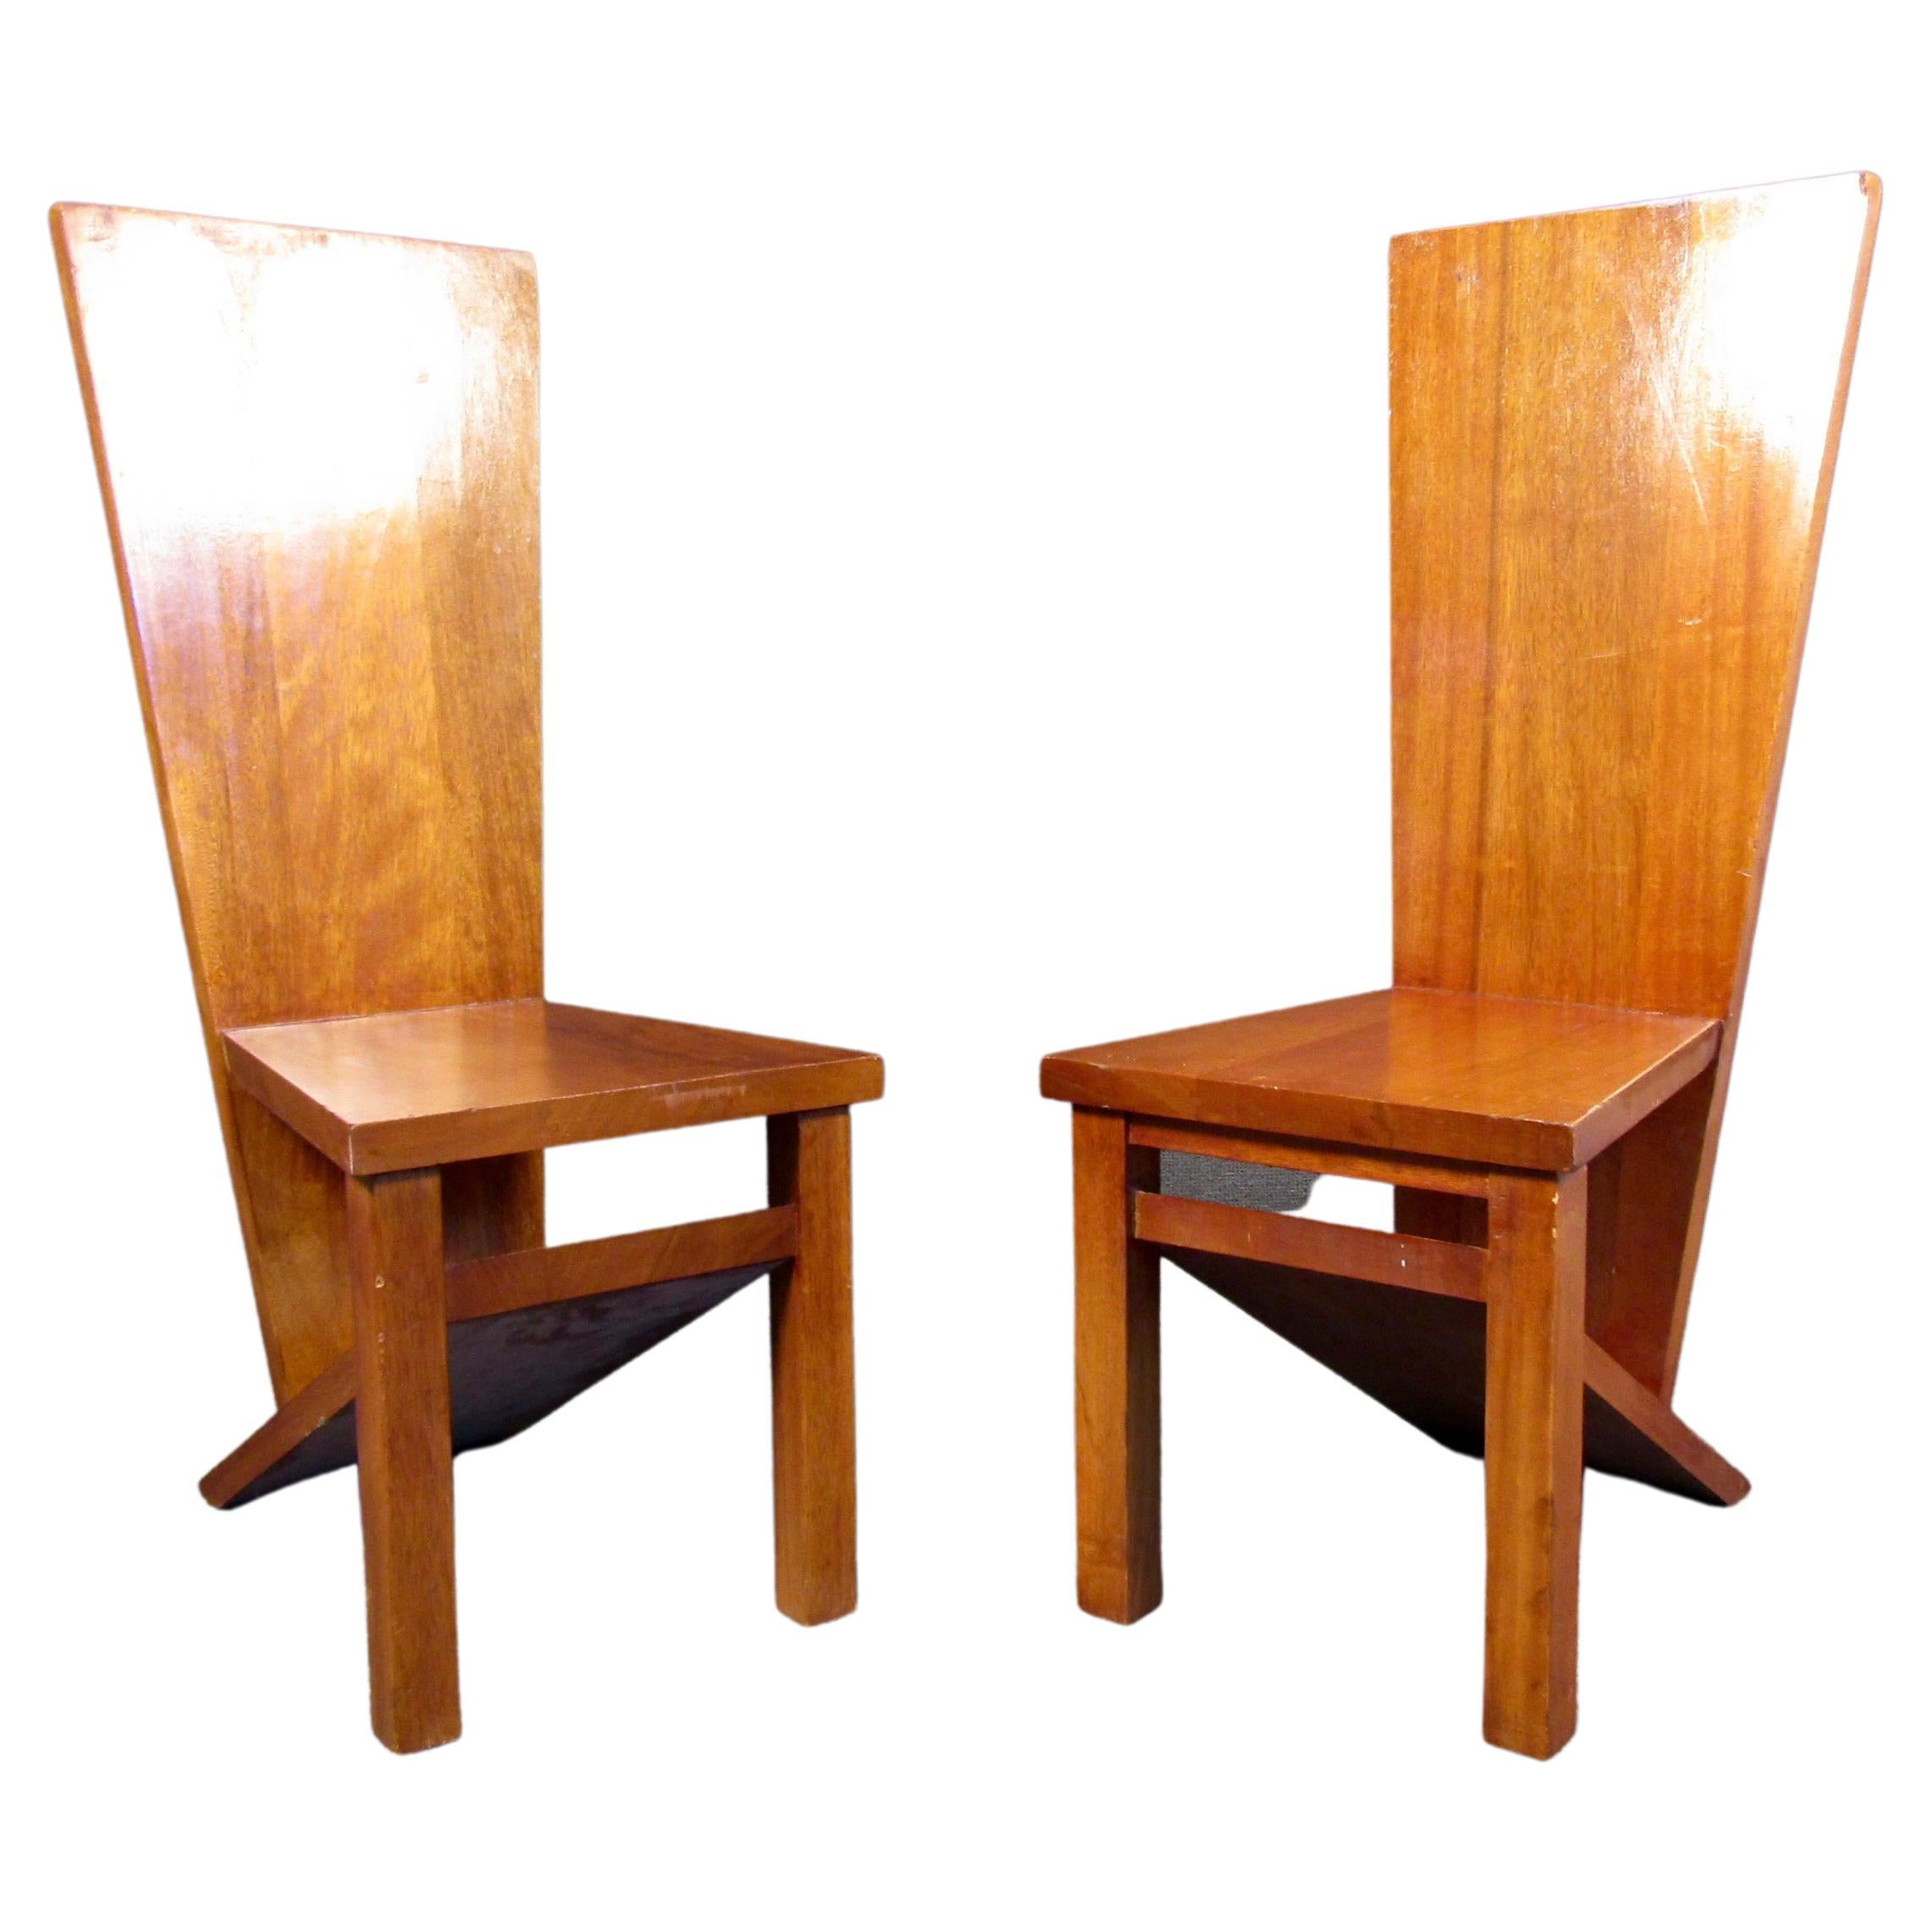 Pair of Walnut Slab Chairs after Gerrit Rietveld For Sale